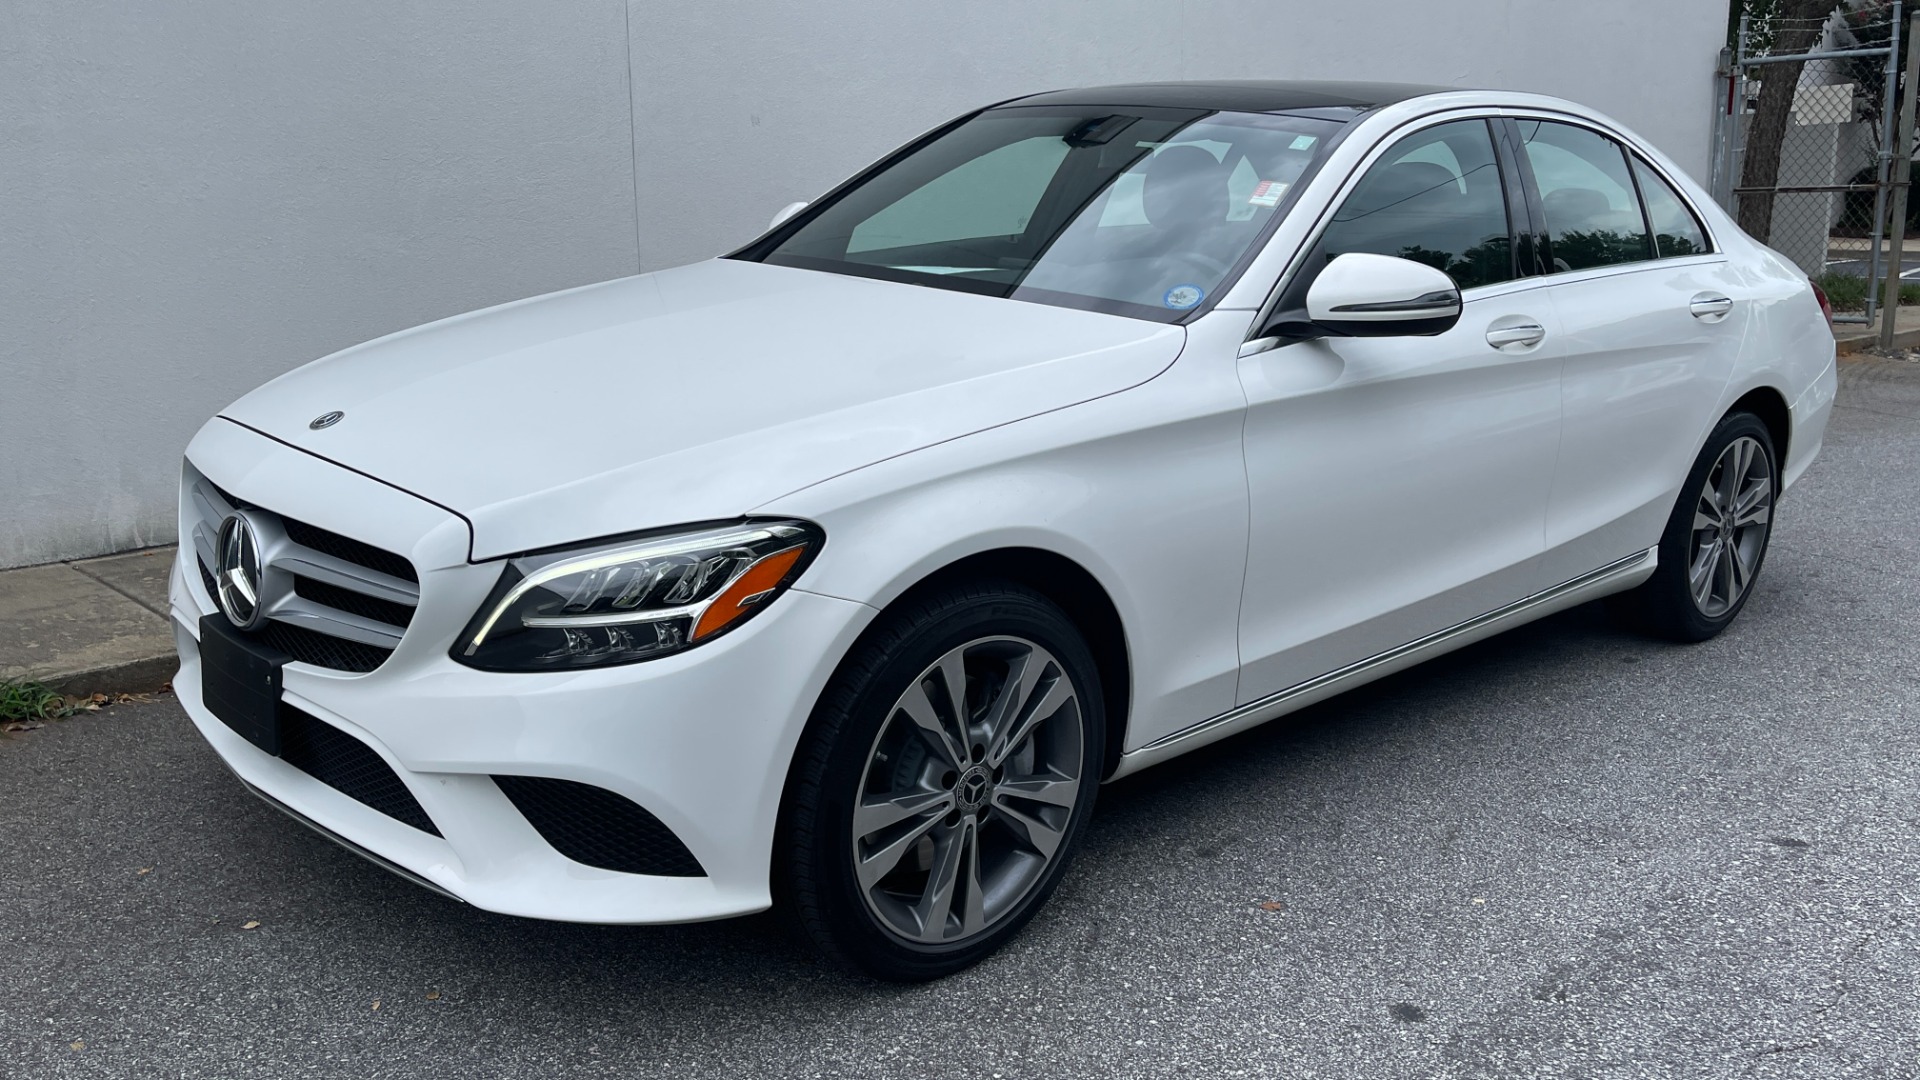 Used 2019 Mercedes-Benz C-Class C300 / PANORAMIC ROOF / BURMESTER / BLIND SPOT / HEATED STEERING AND SEATS for sale $34,995 at Formula Imports in Charlotte NC 28227 3